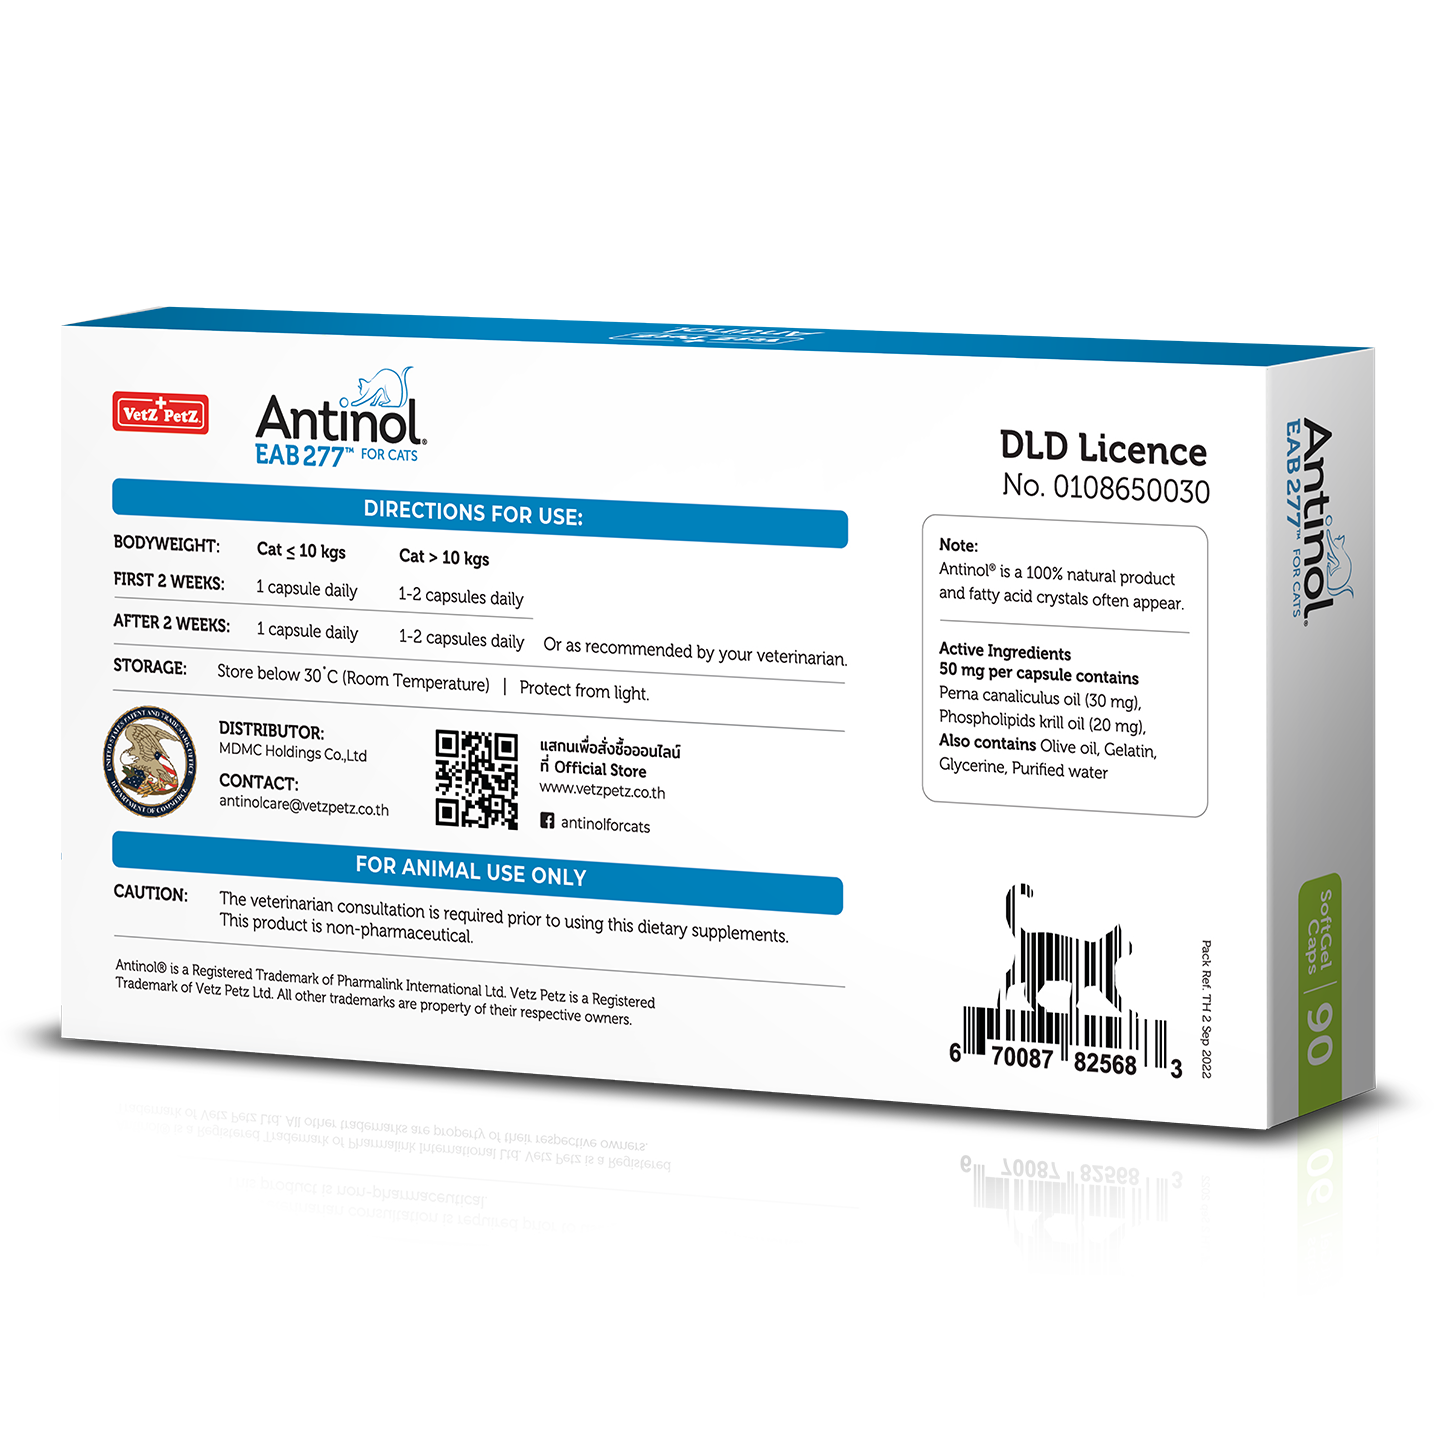 Antinol<sup>®</sup>️ EAB 277™ for Cats